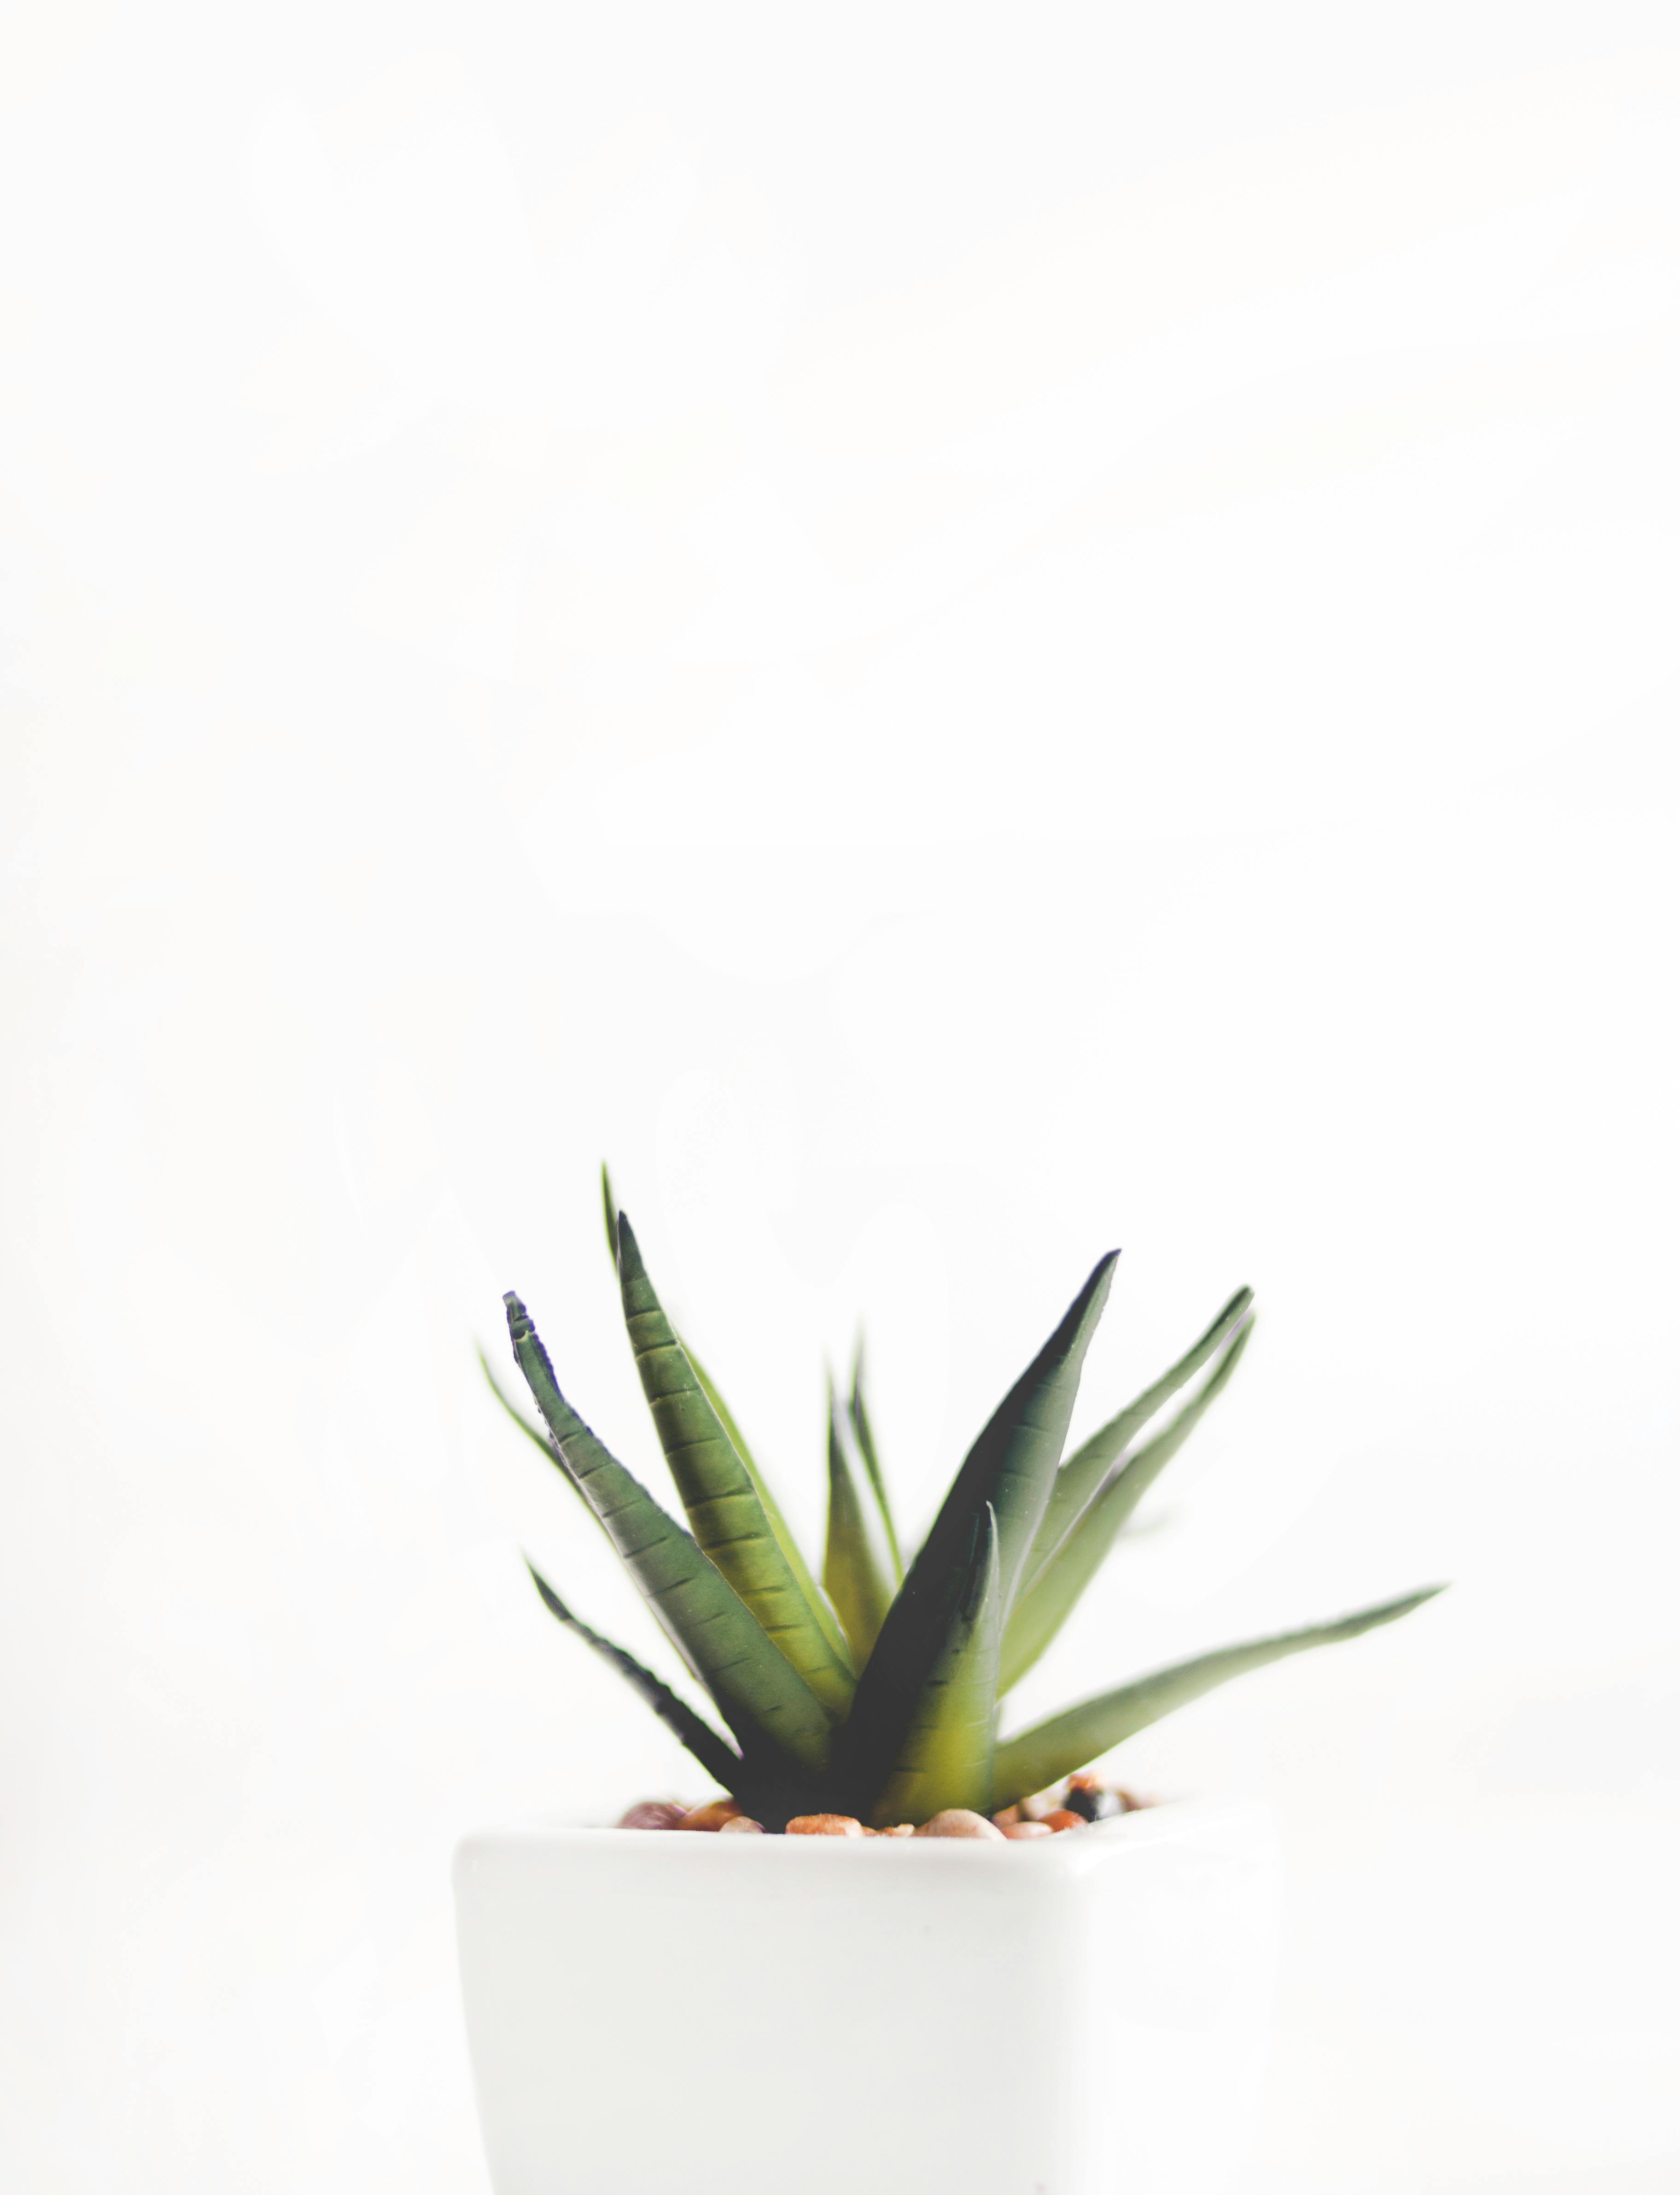 89109 Agave Images Stock Photos  Vectors  Shutterstock